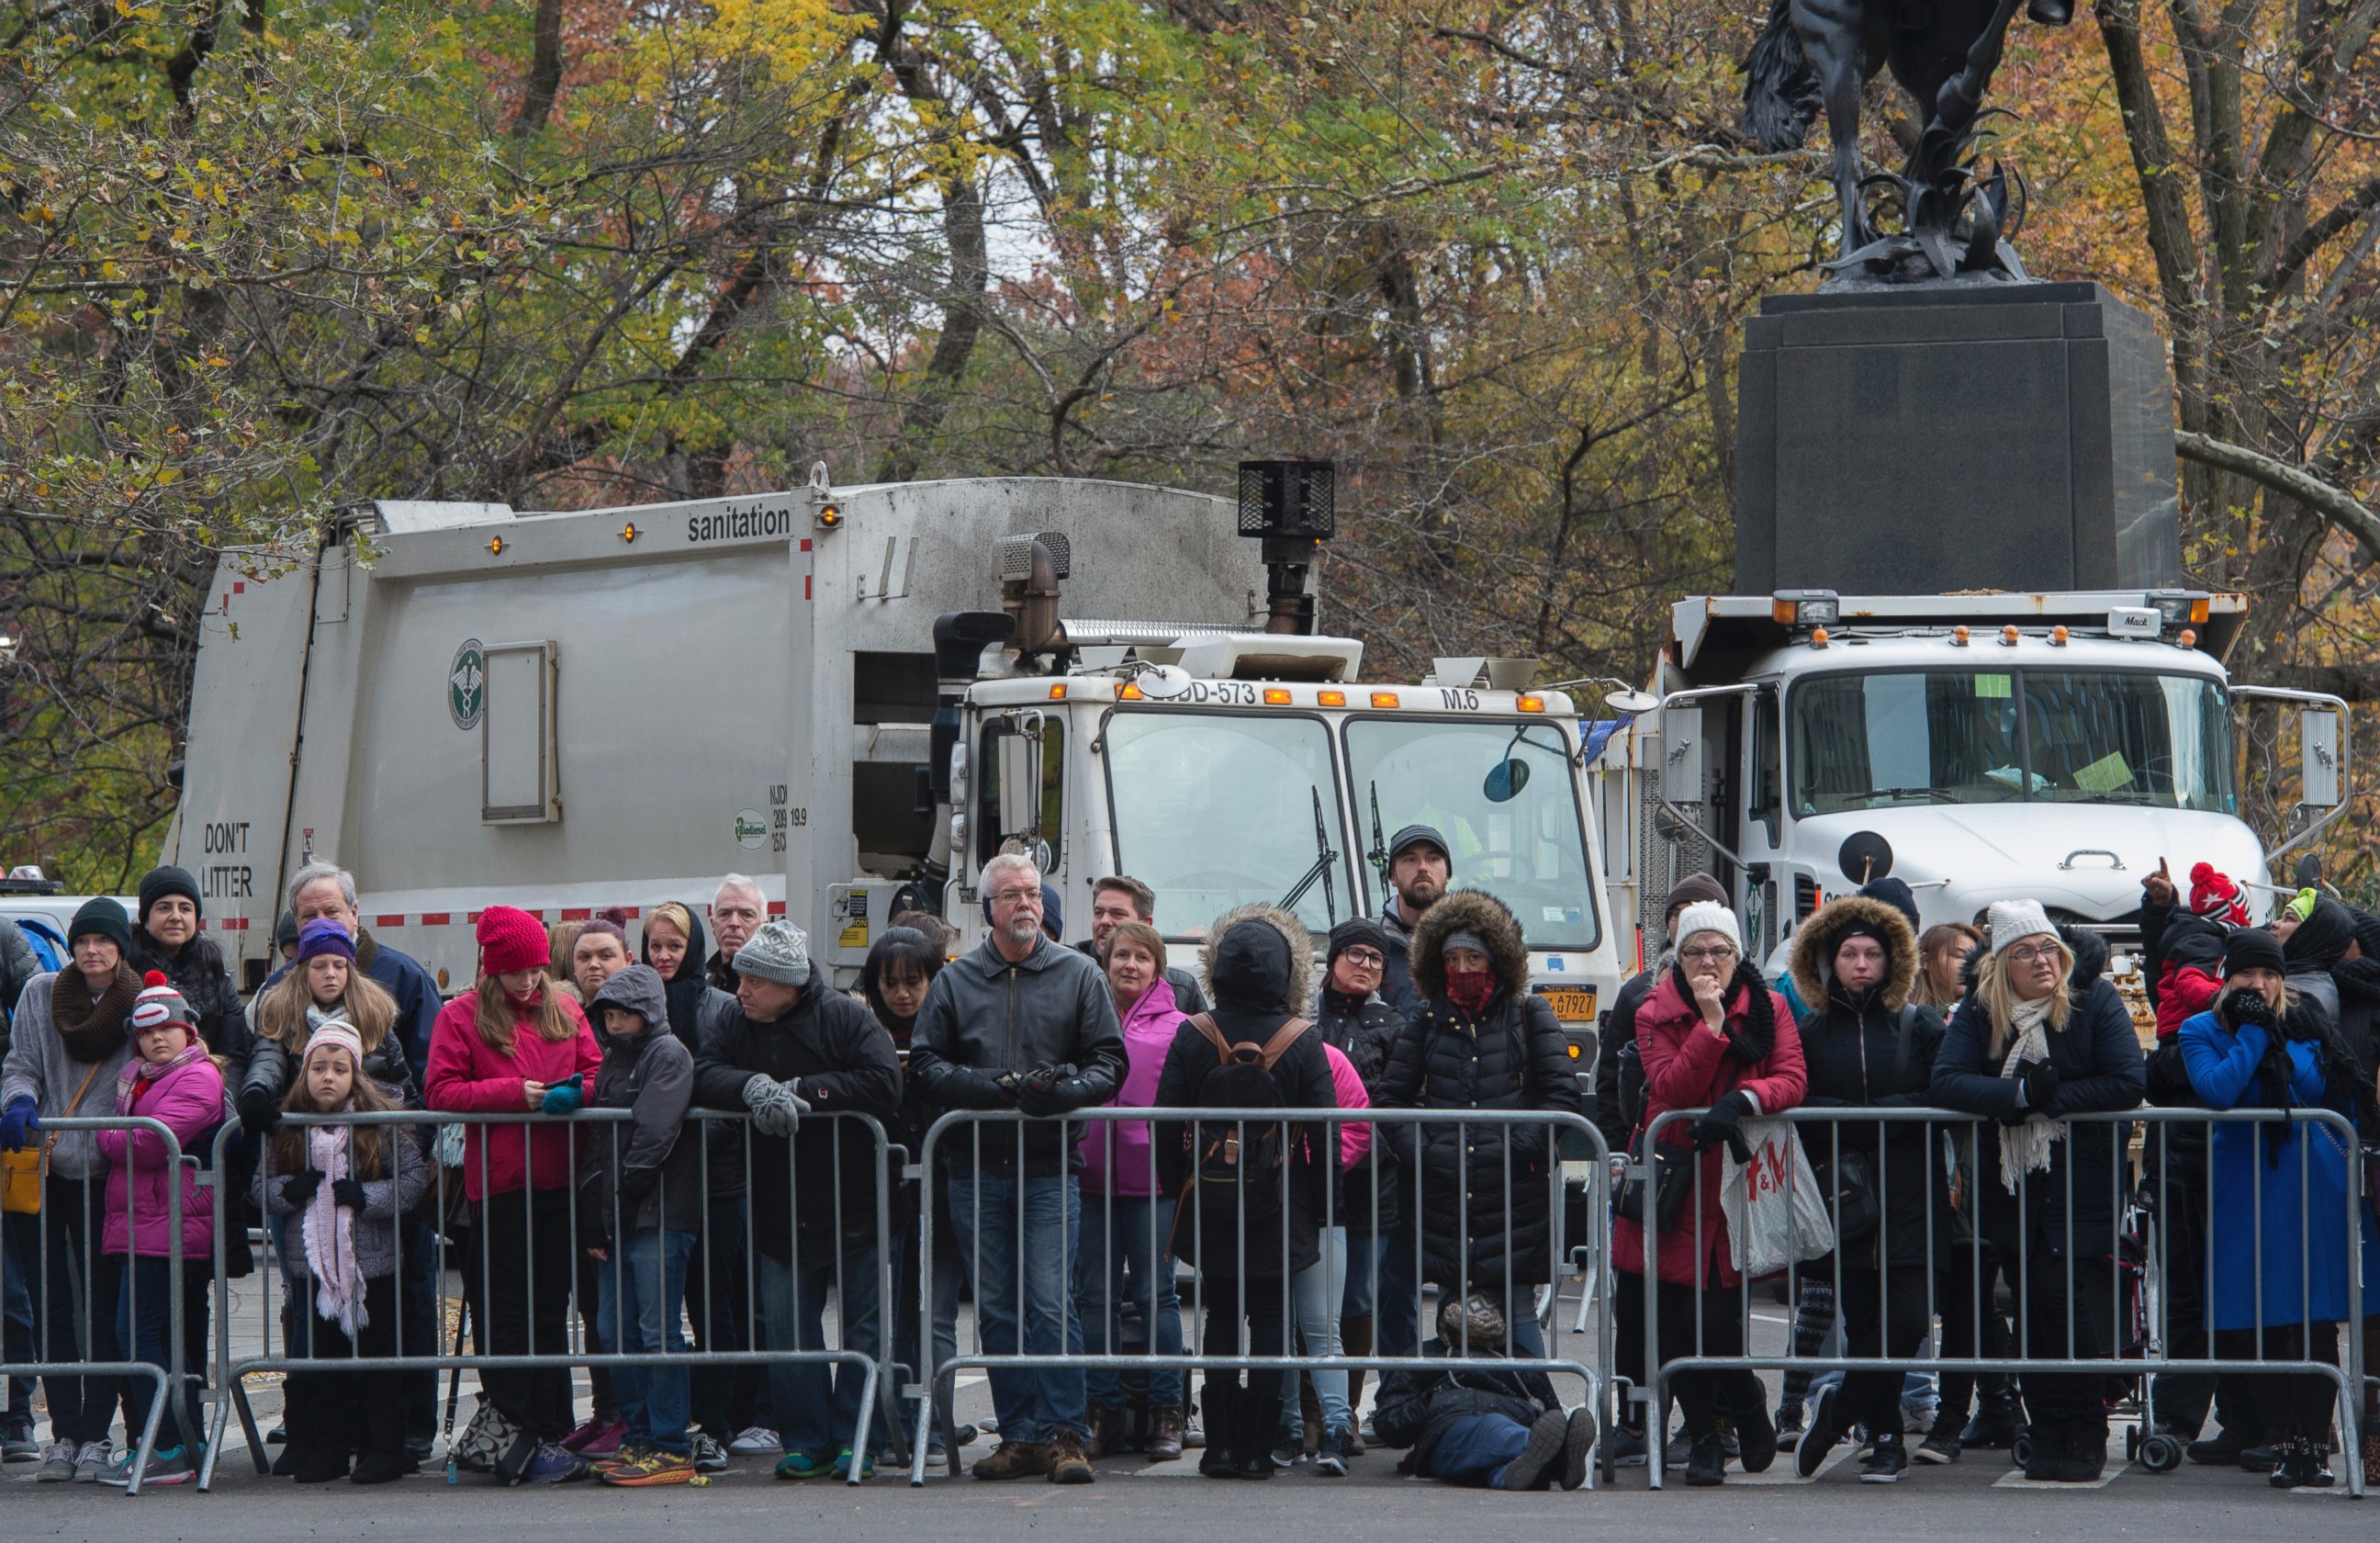 PHOTO: NYC Department of Sanitation trucks block the street at Central Park South as people gather before the Macy's Thanksgiving Day Parade, Nov. 24, 2016, in New York.